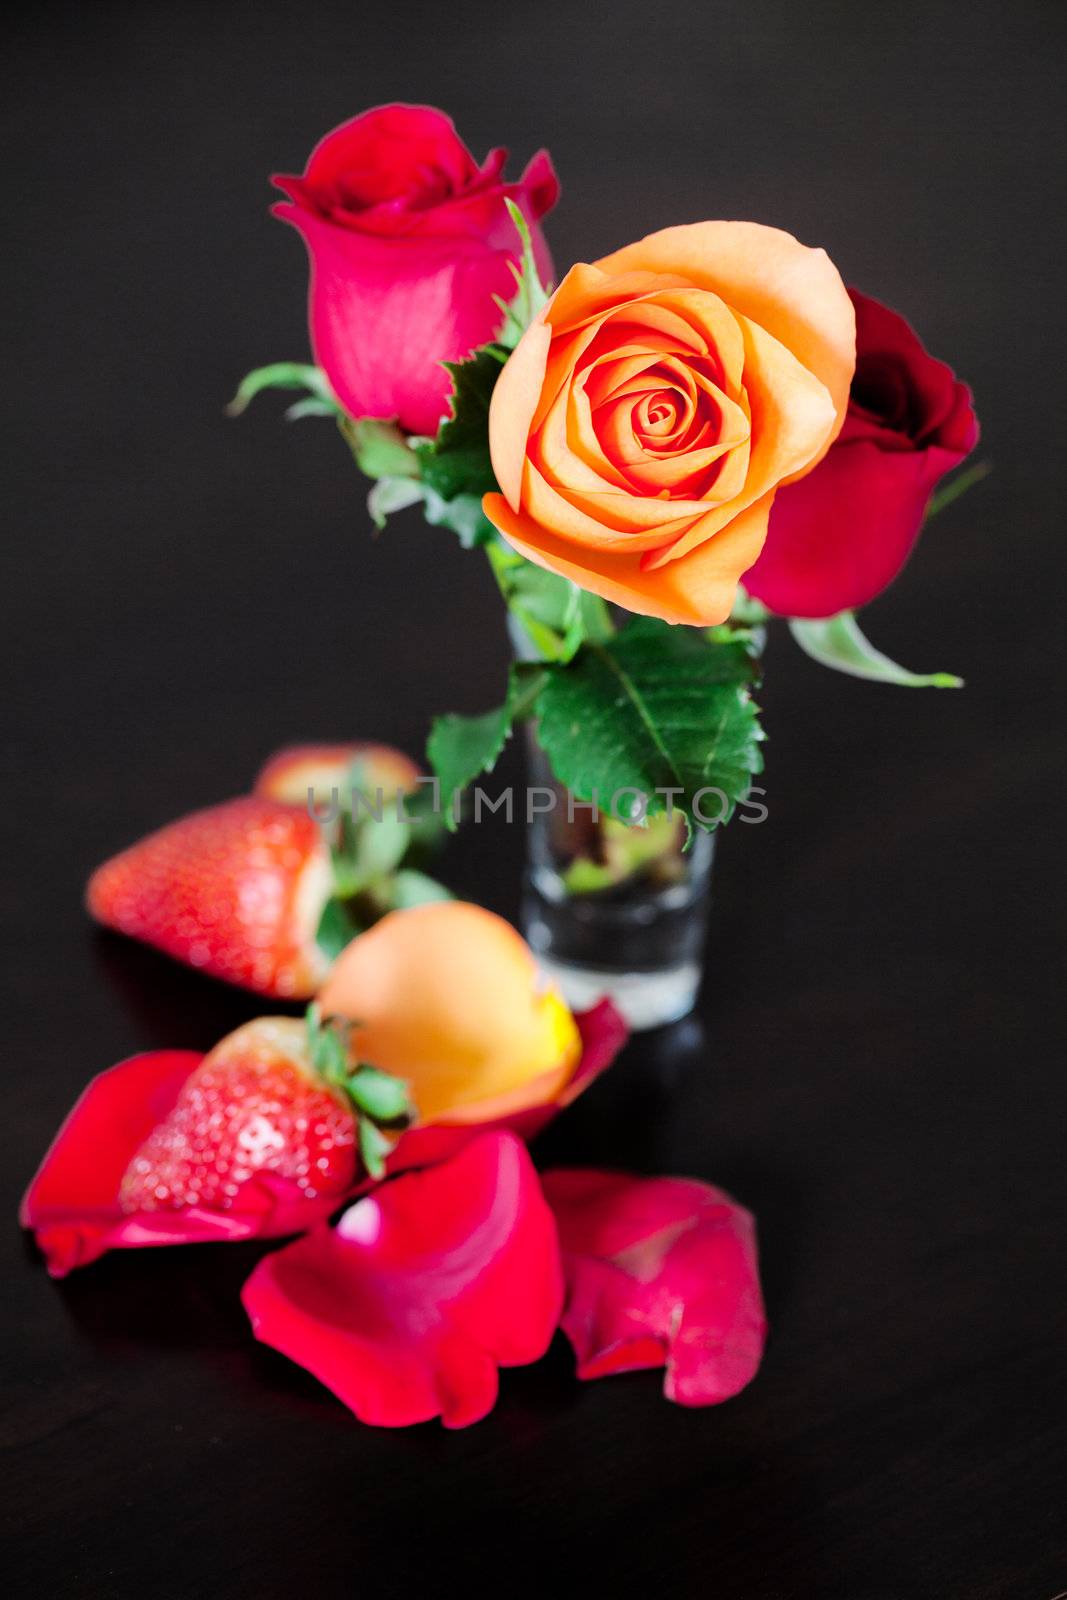 bouquet of colorful roses in a vase and strawberry on a wooden t by jannyjus